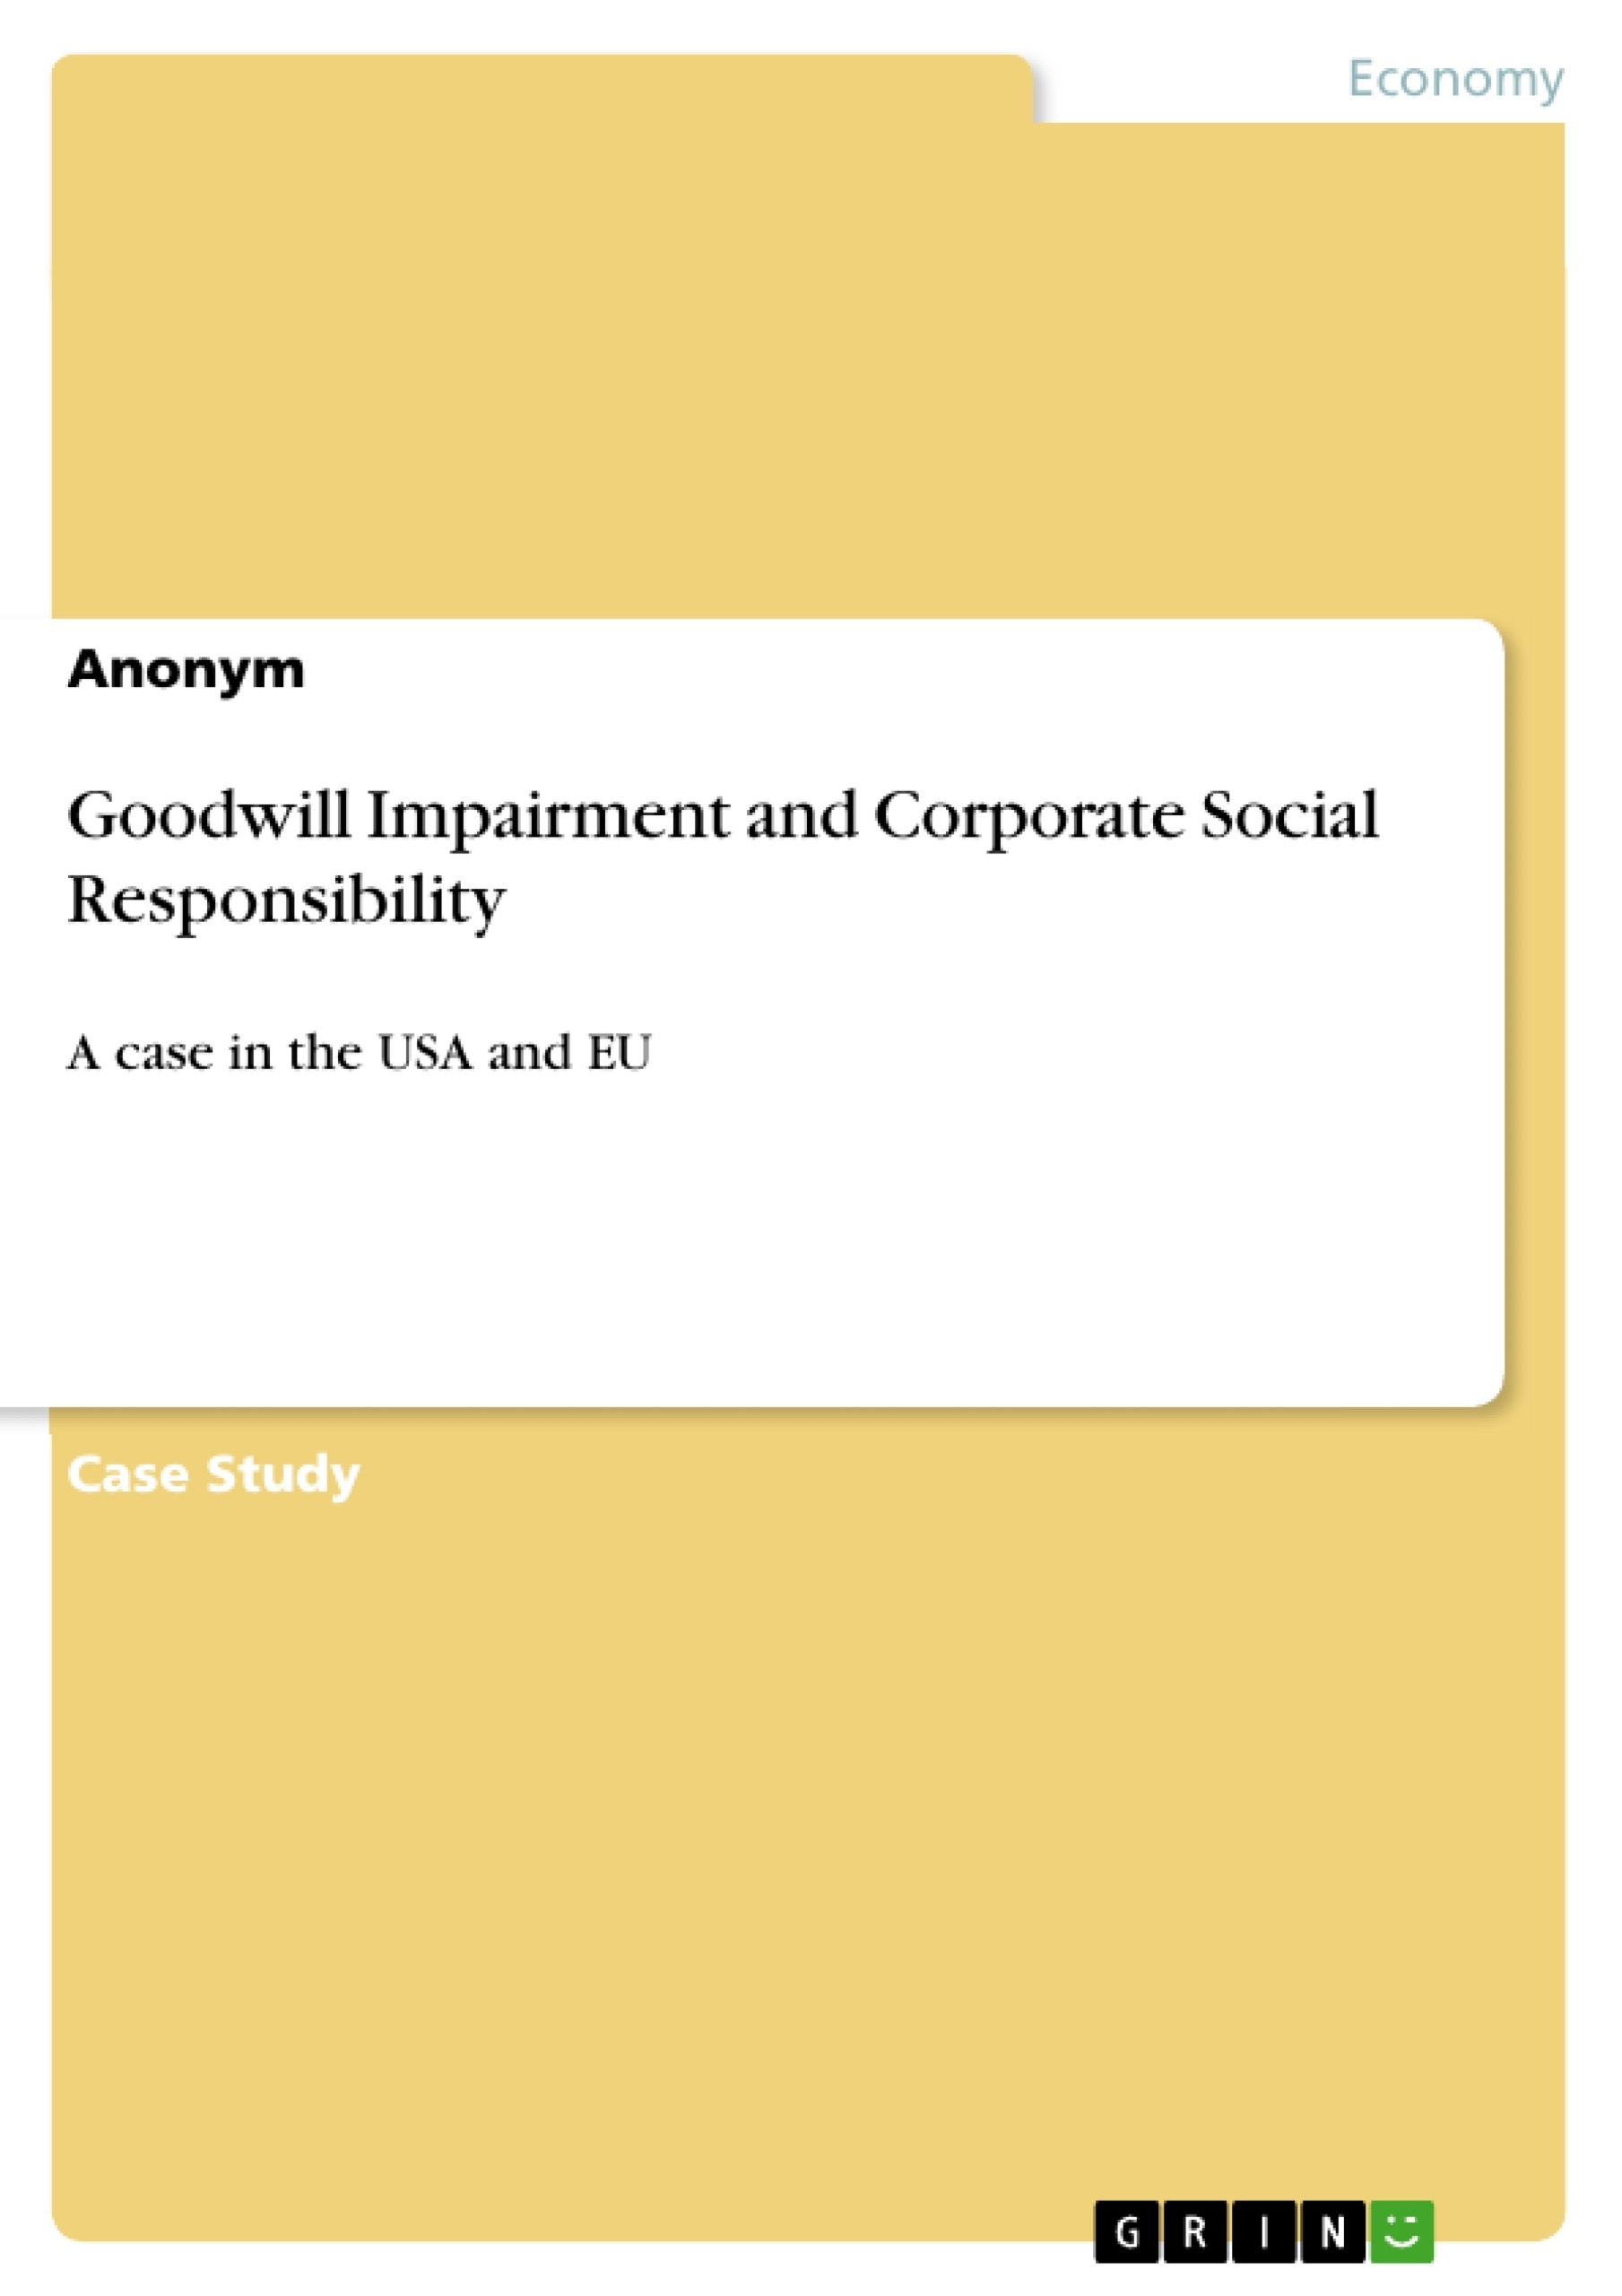 Title: Goodwill Impairment and Corporate Social Responsibility